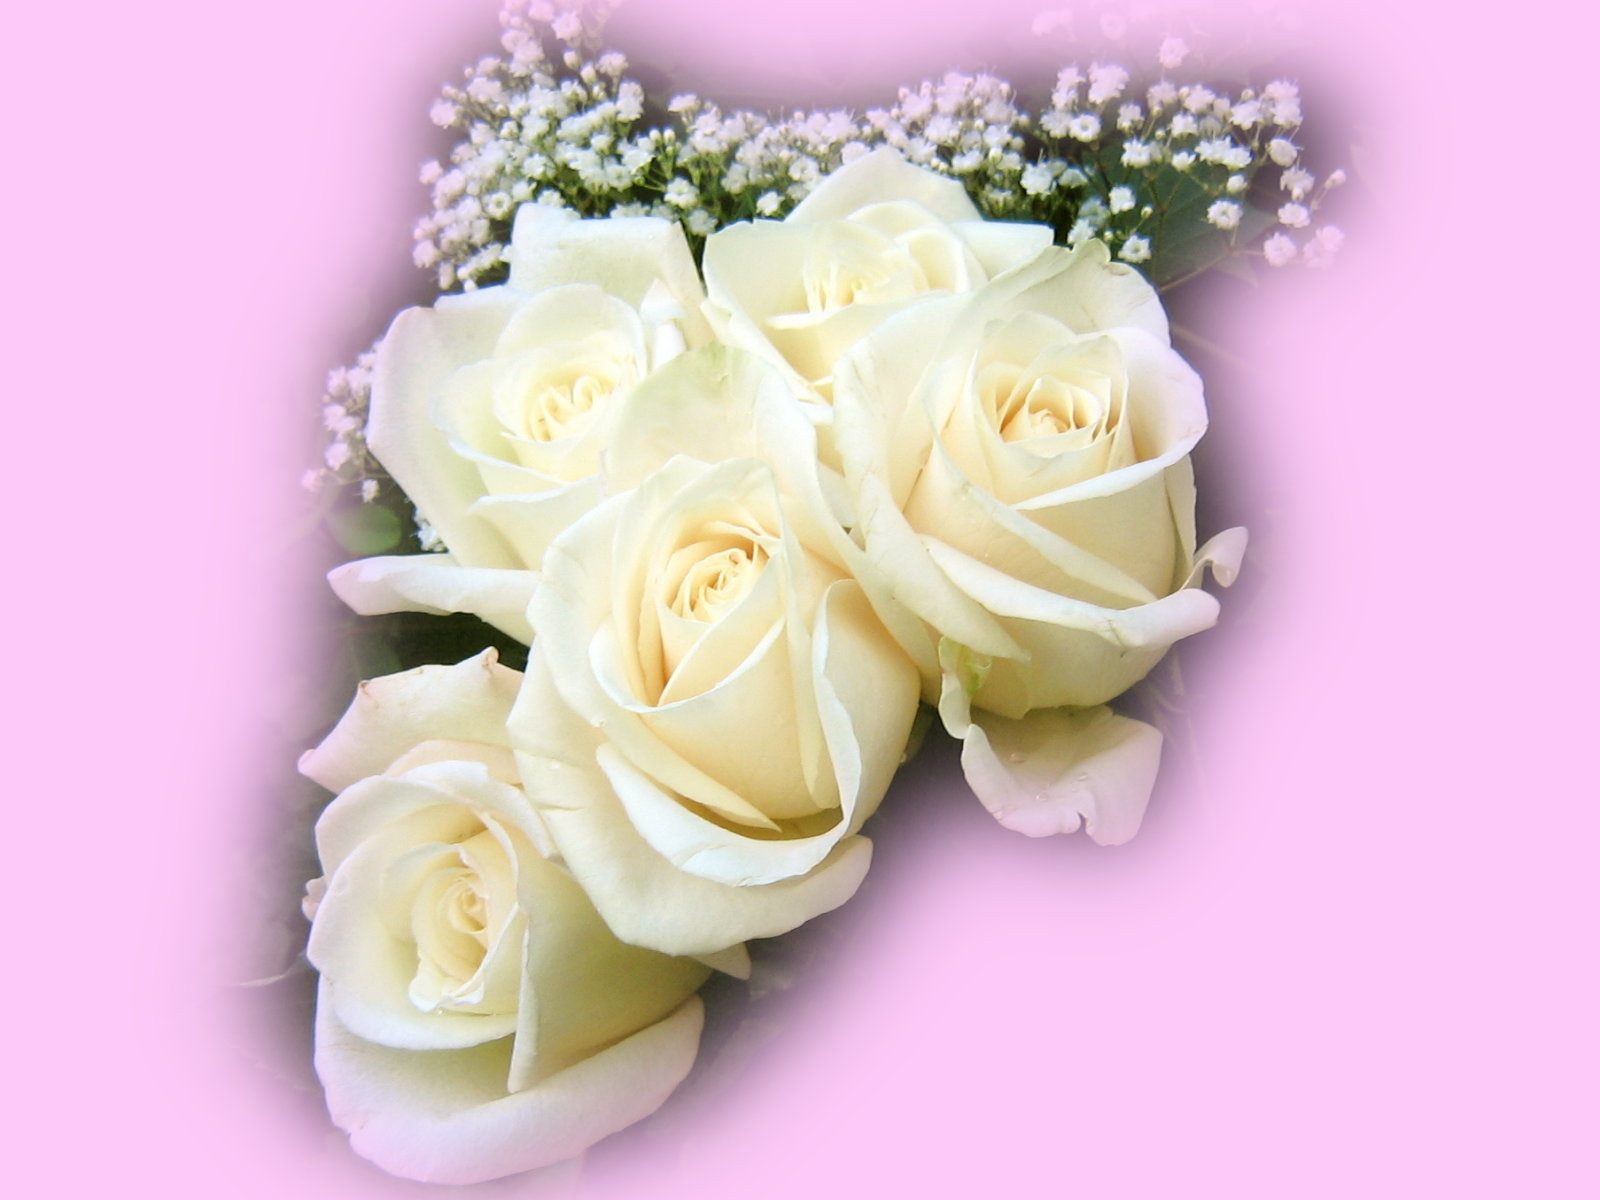 roses bouquet wallpaper beautiful white roses